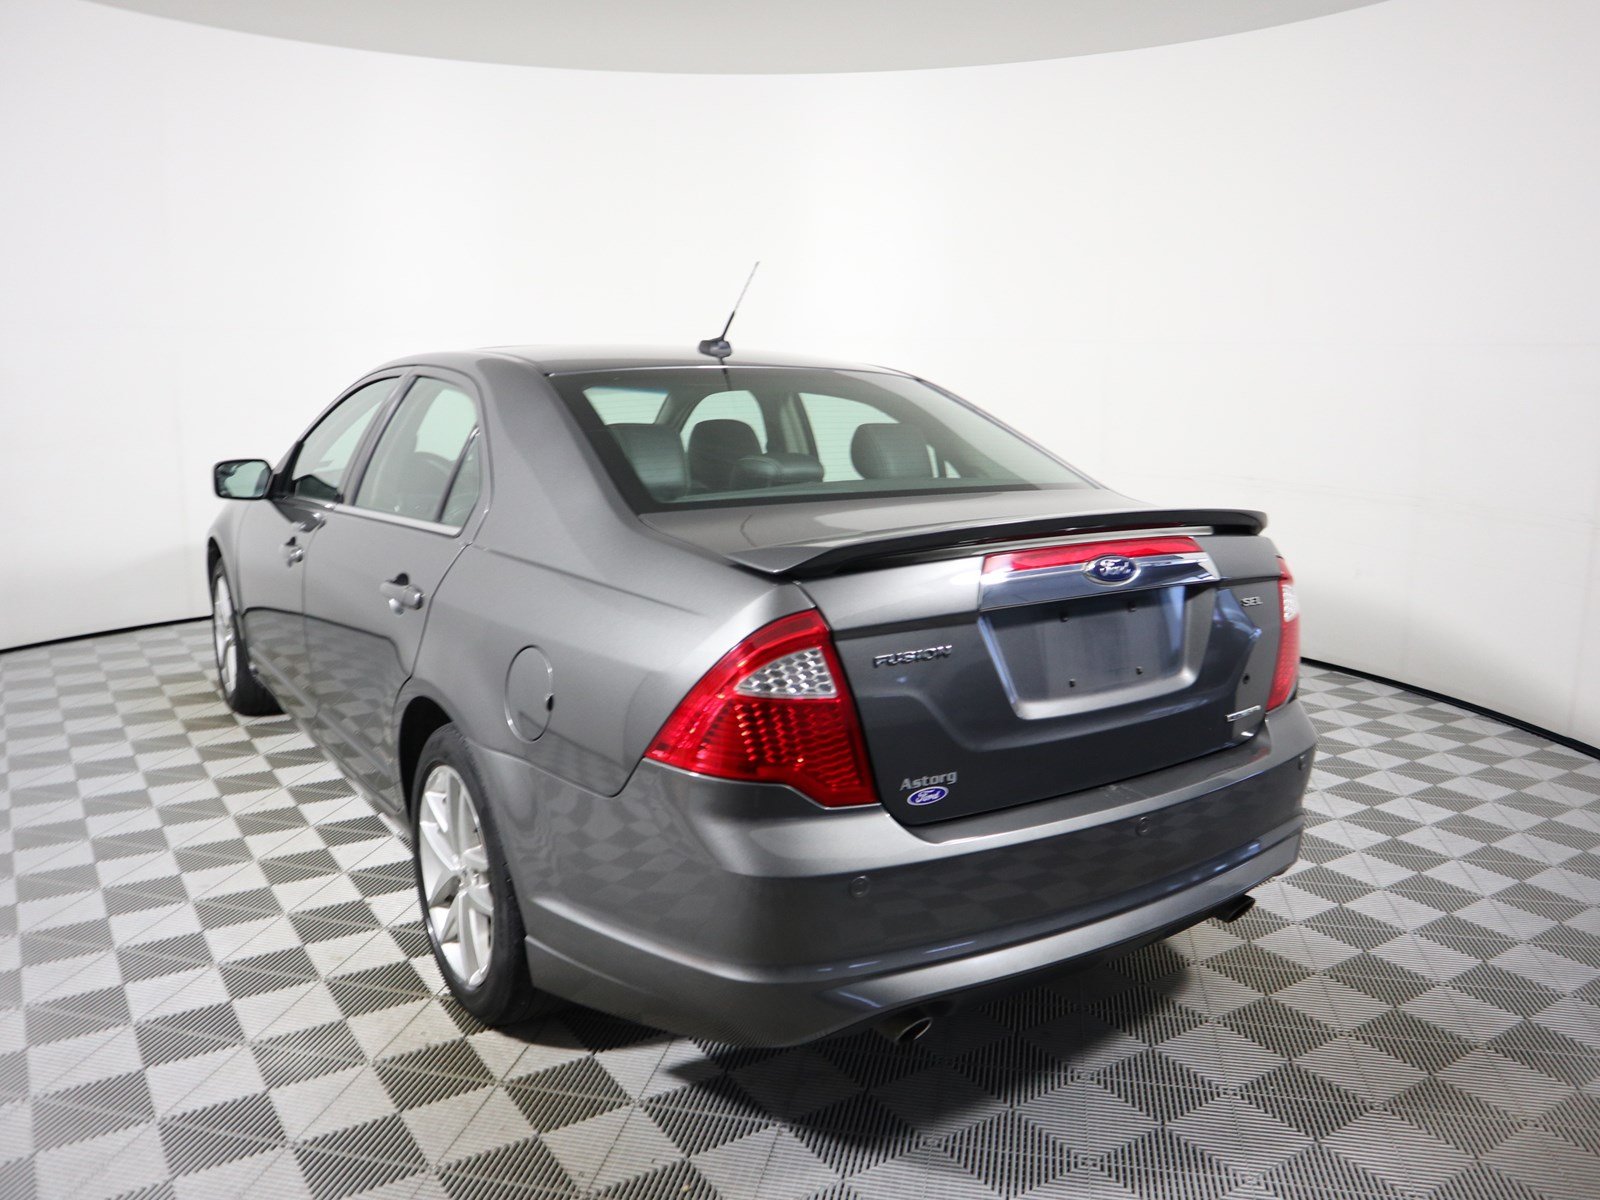 Pre-Owned 2012 Ford Fusion SEL 4dr Car in Parkersburg #F18014A | Astorg